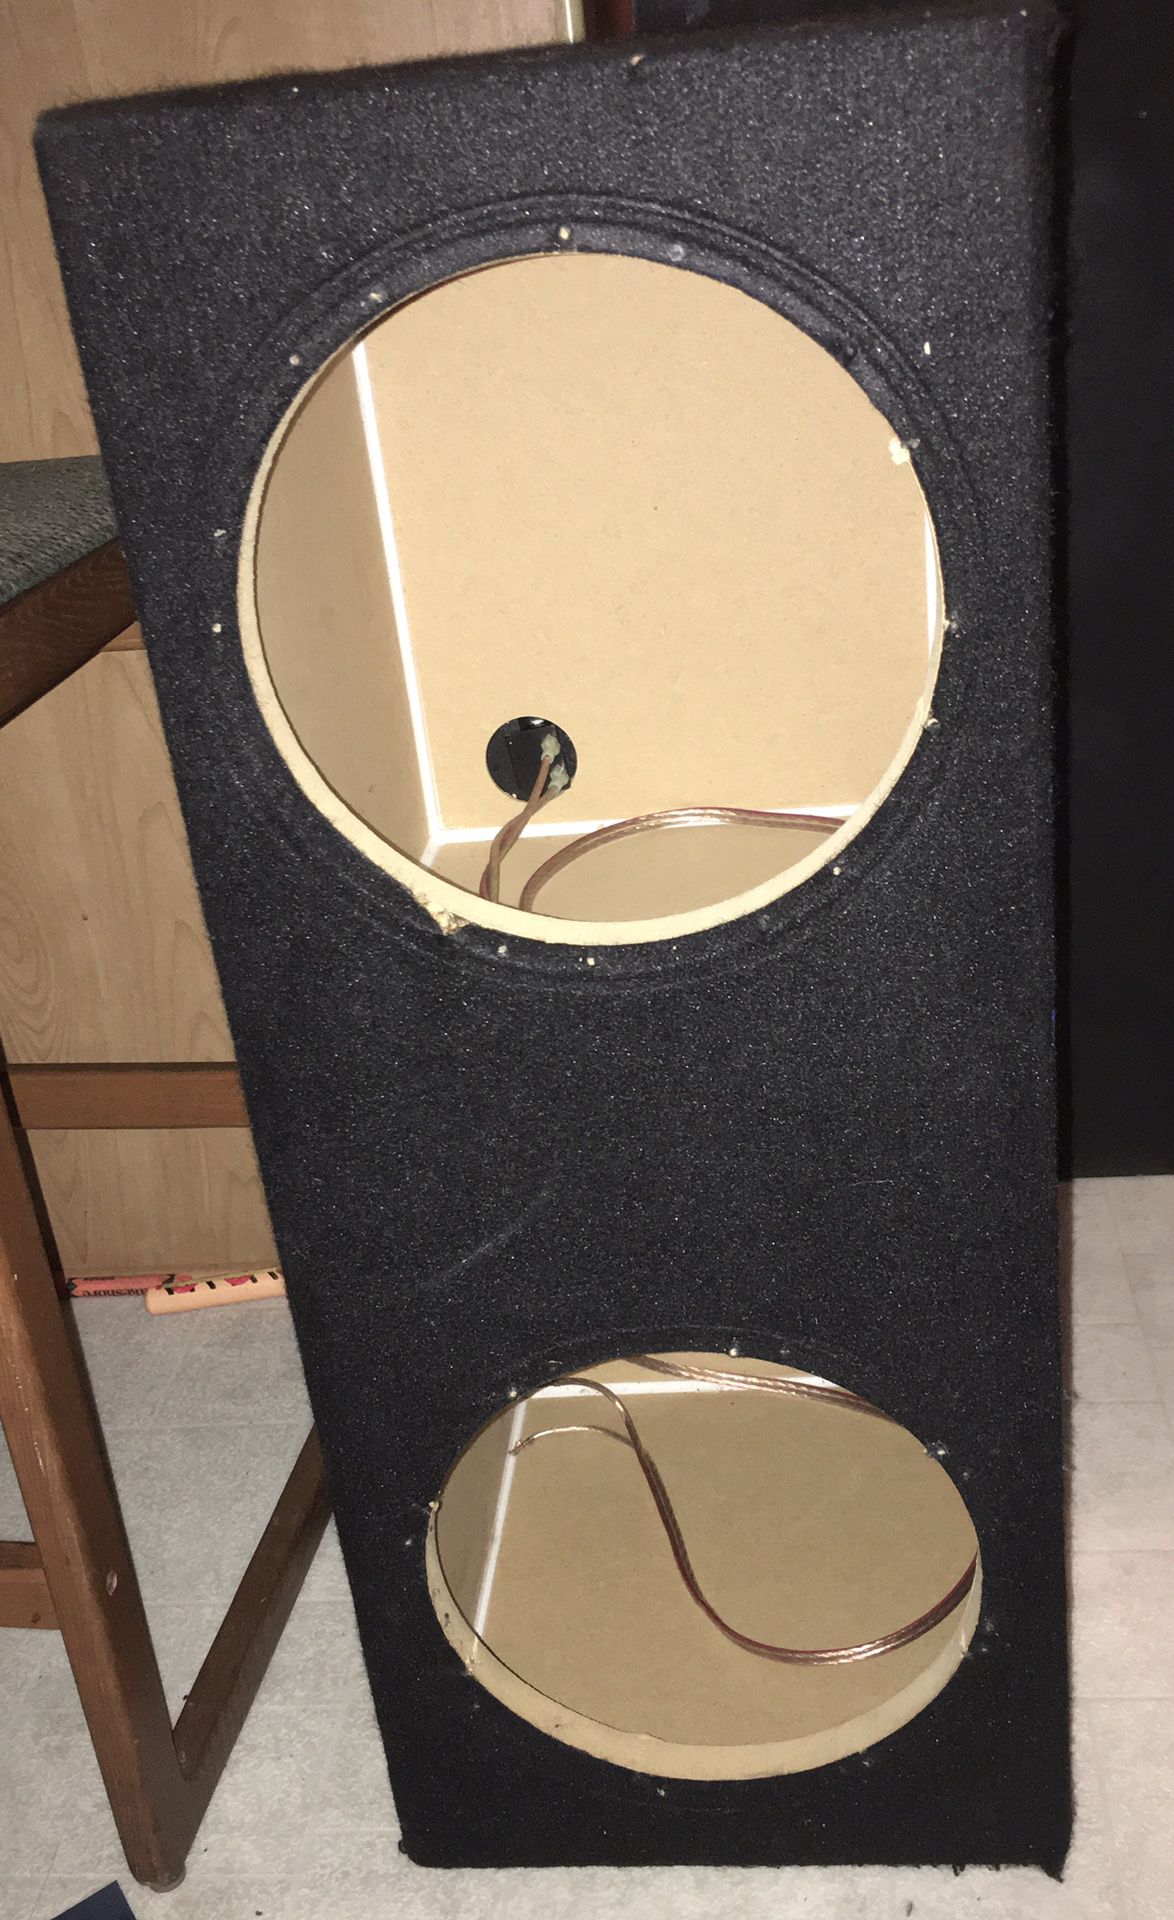 2 10s subwoofer box only!!!